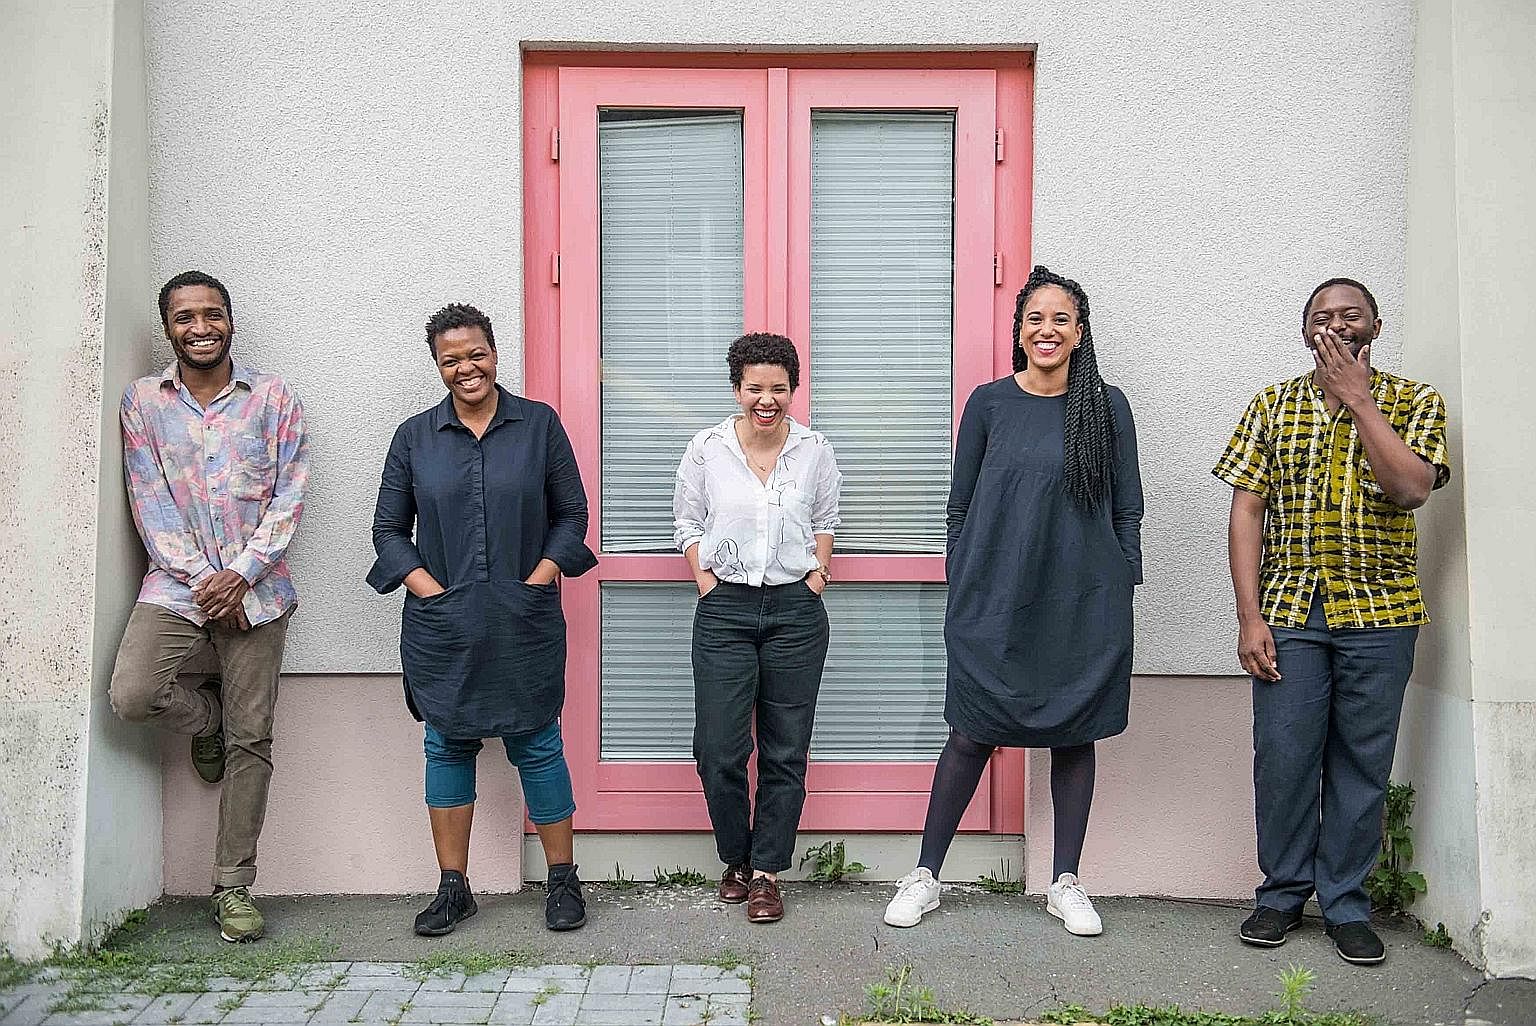 The curatorial team of the 10th Berlin Biennale for Contemporary Art (from far left) Thiago de Paula Souza, Gabi Ngcobo, Nomaduma Rosa Masilela, Yvette Mutumba and Moses Serubiri. The Shanghai Biennale will take place in the city's Power Station Of A